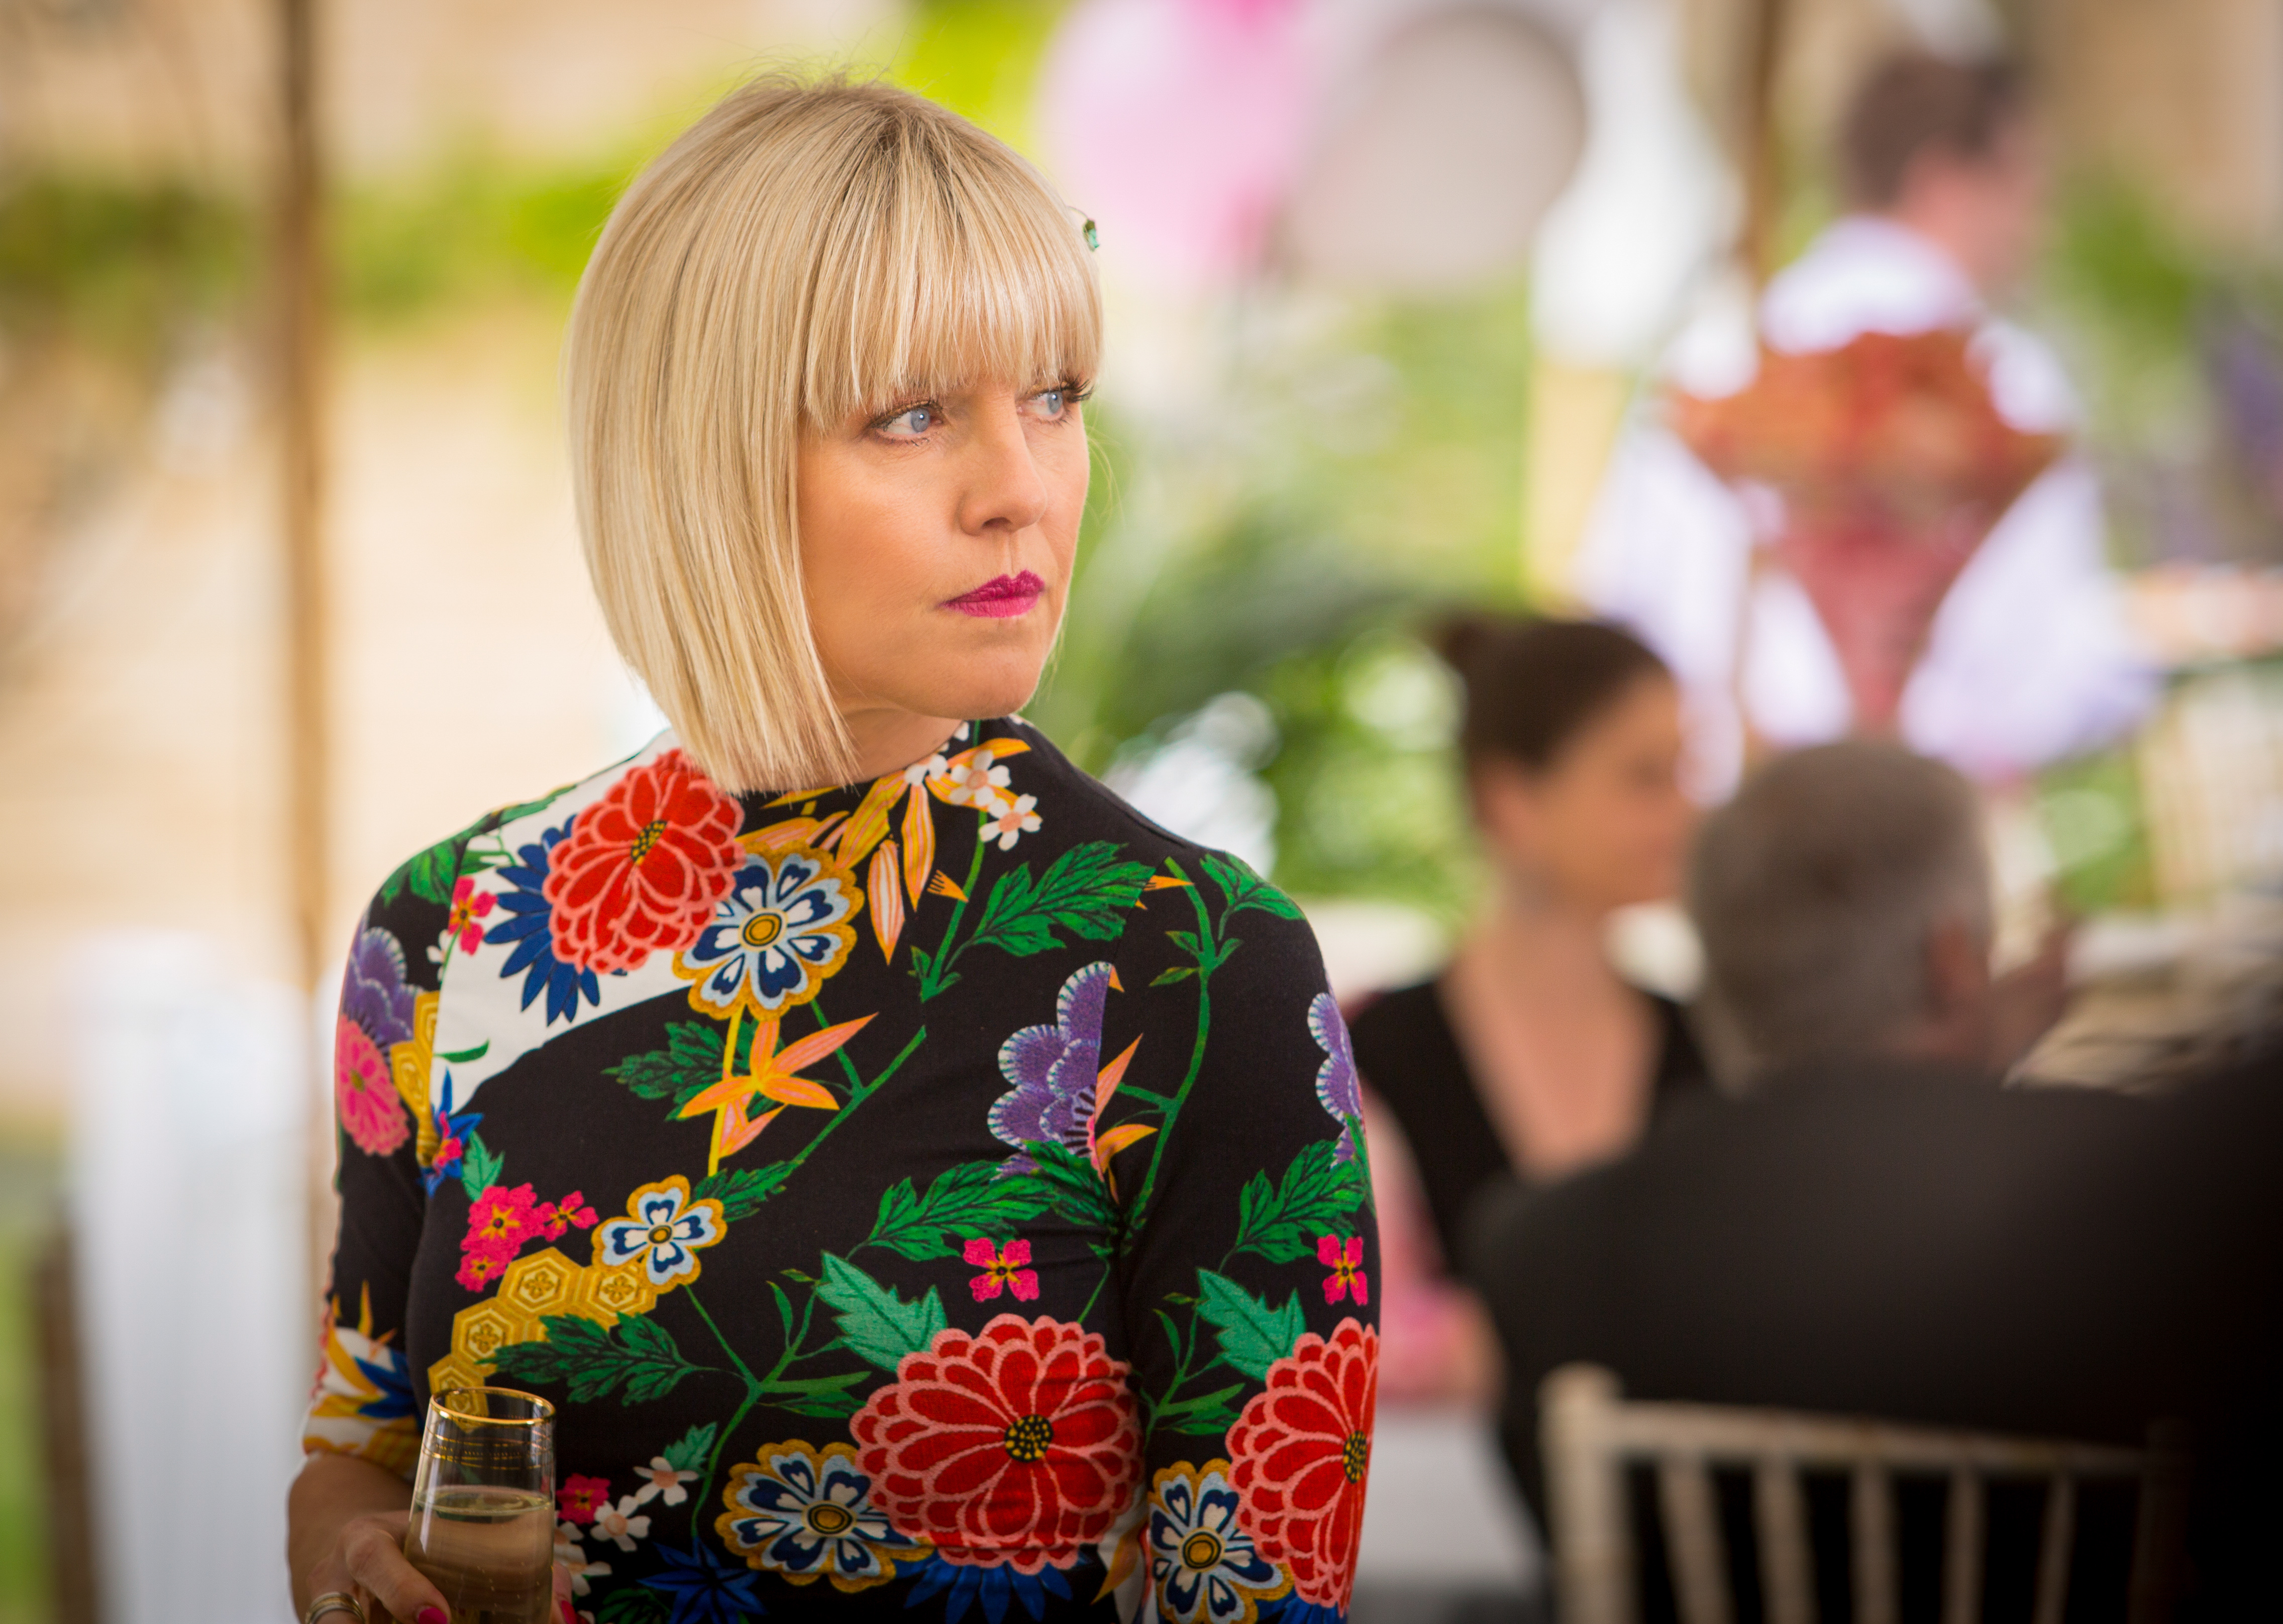 https://static.wikia.nocookie.net/agatharaisin/images/a/af/S03E02_Deadly_Dance_Still_03.jpg/revision/latest?cb=20210423160401